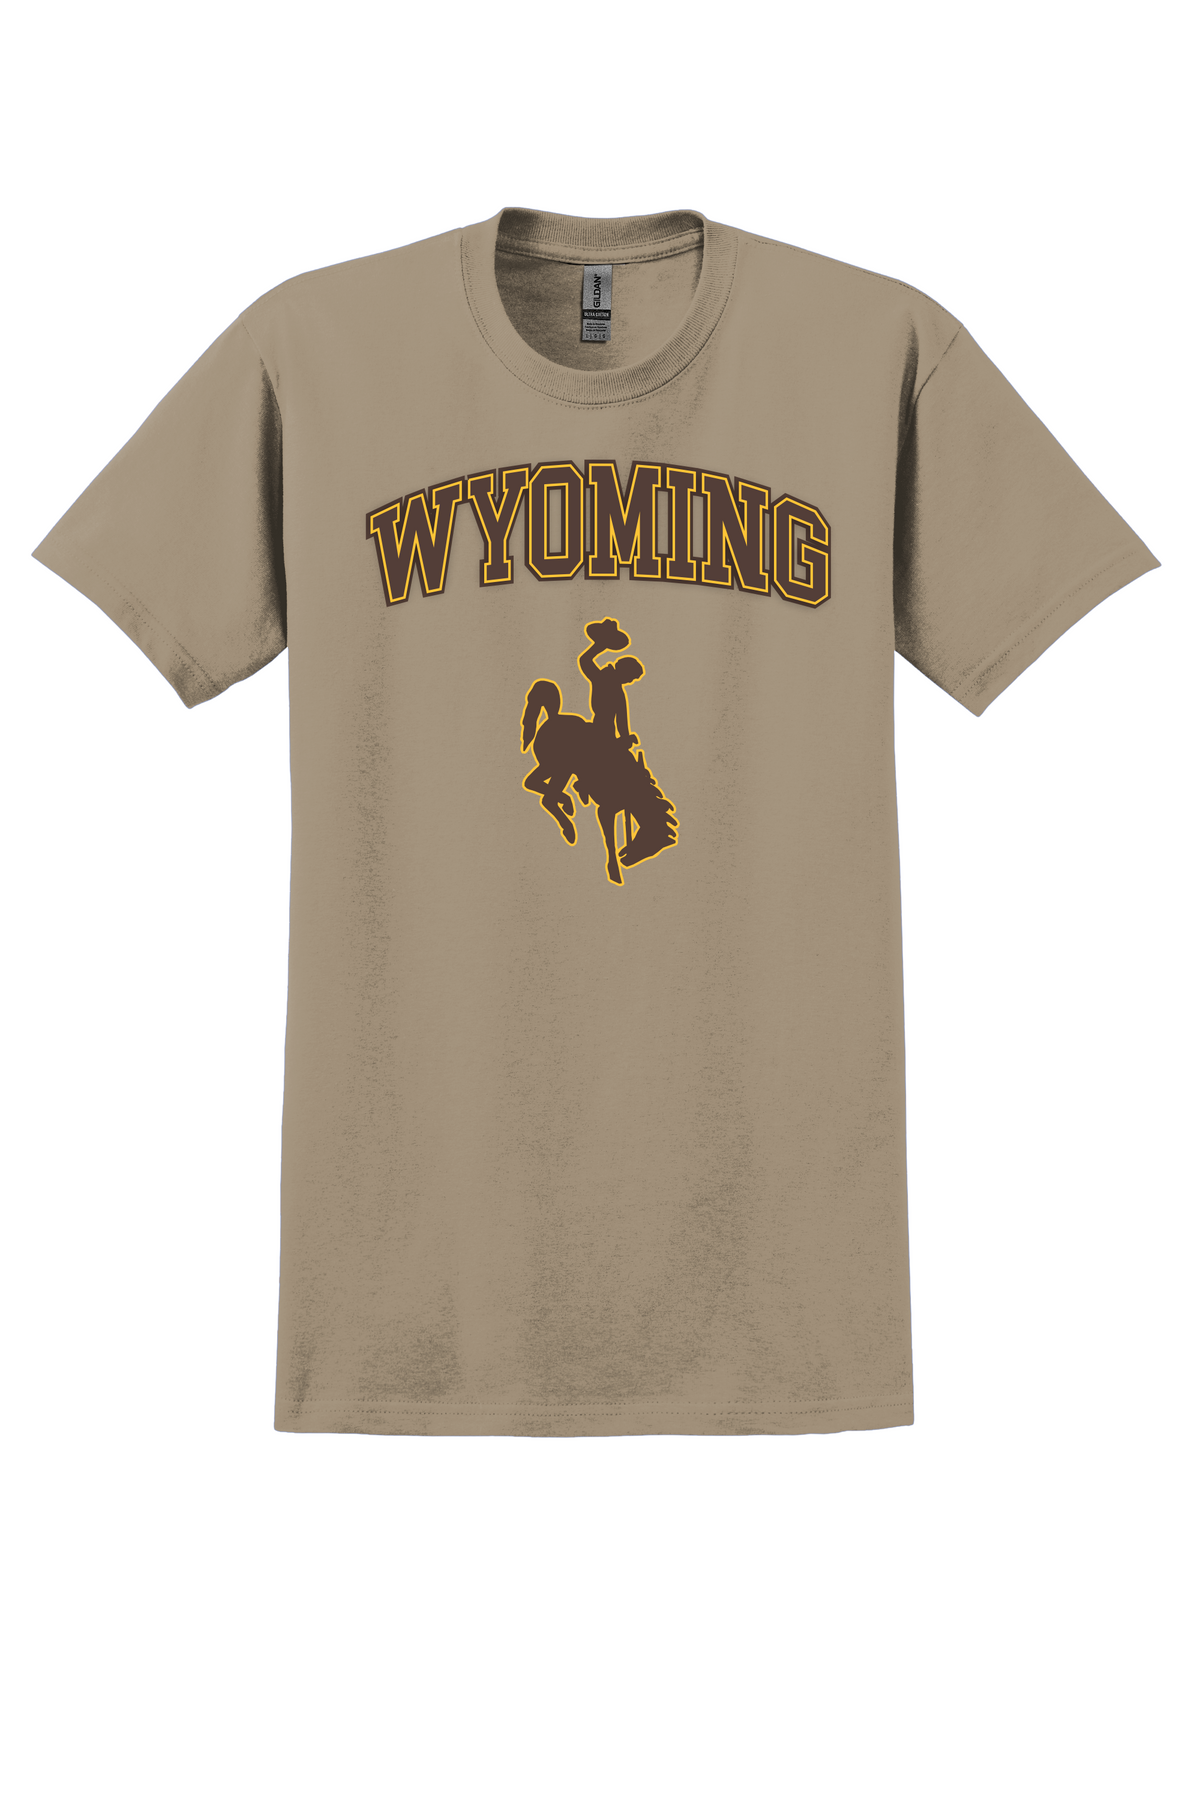 Wyoming Cowboys T-shirt - Wind River Outpost